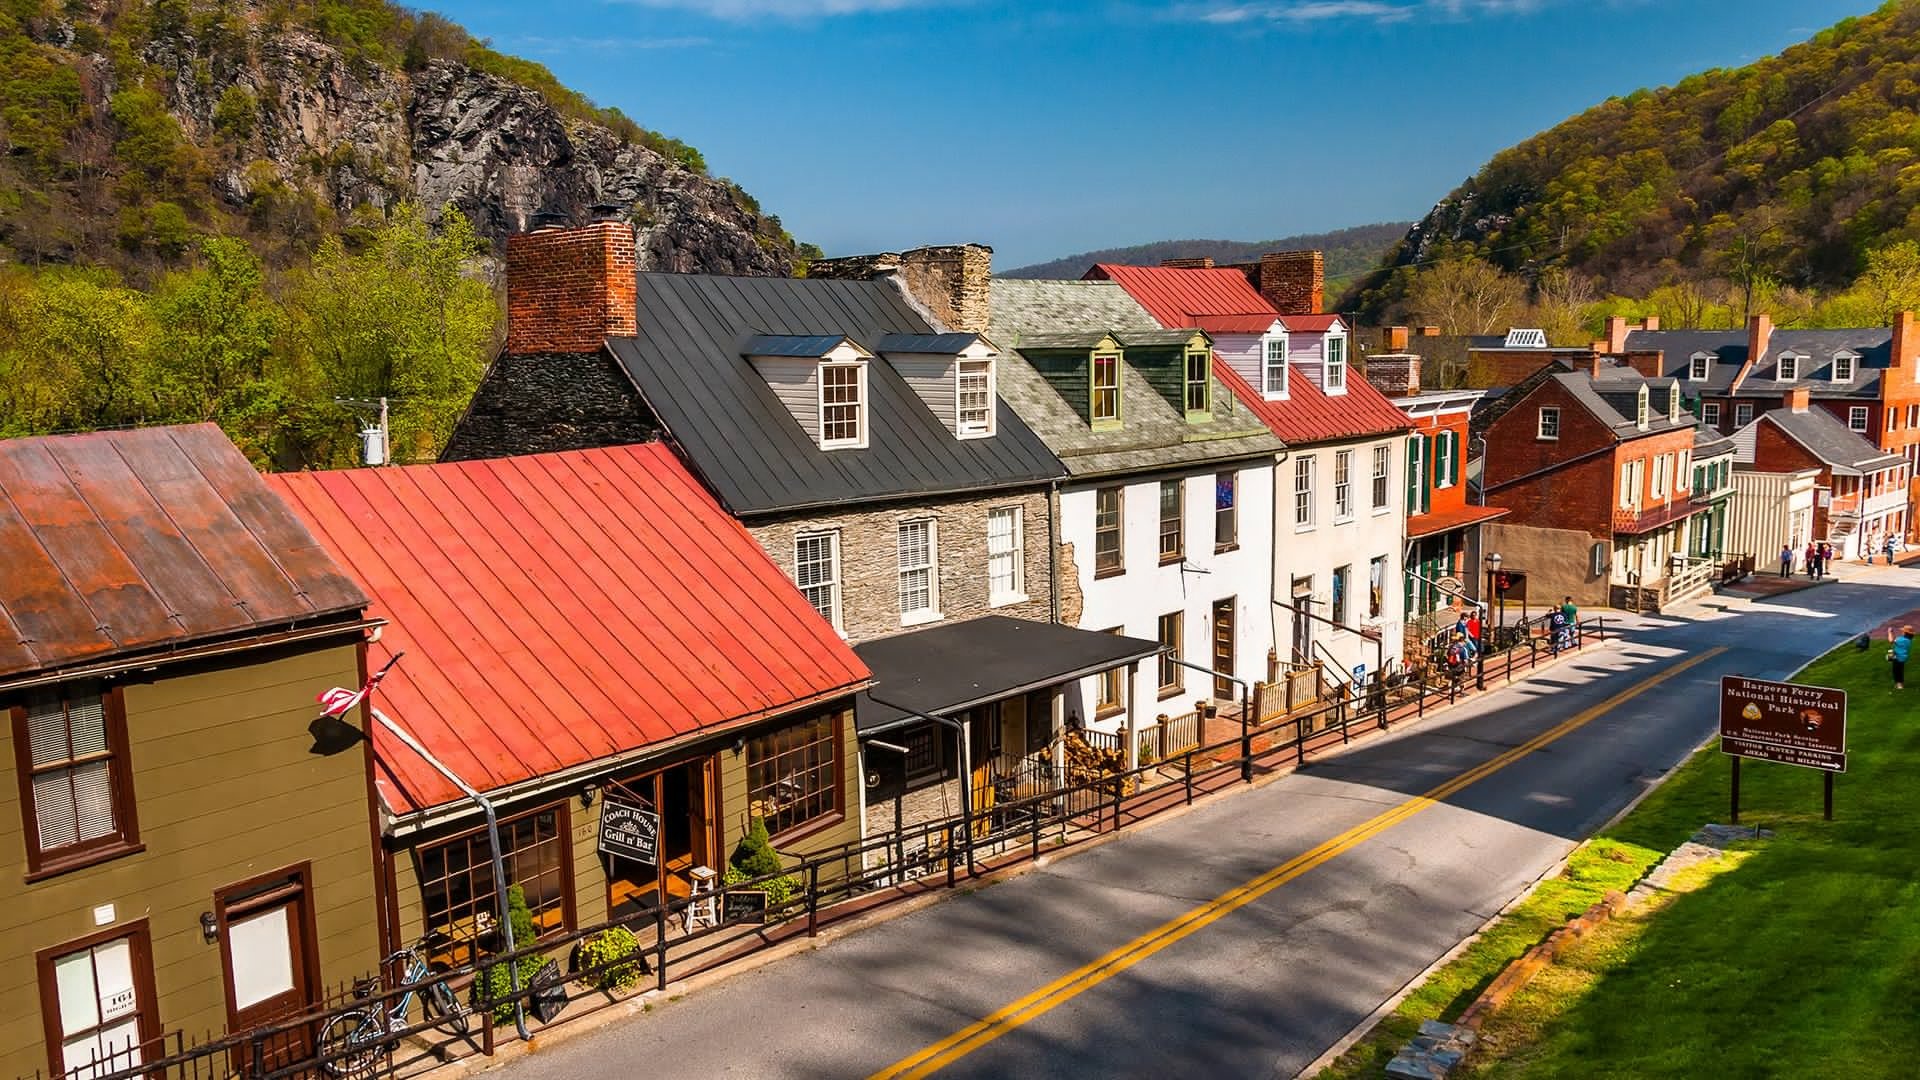 Harpers Ferry history lesson, Road trips, Tom's travel adventures, West Virginia, 1920x1080 Full HD Desktop